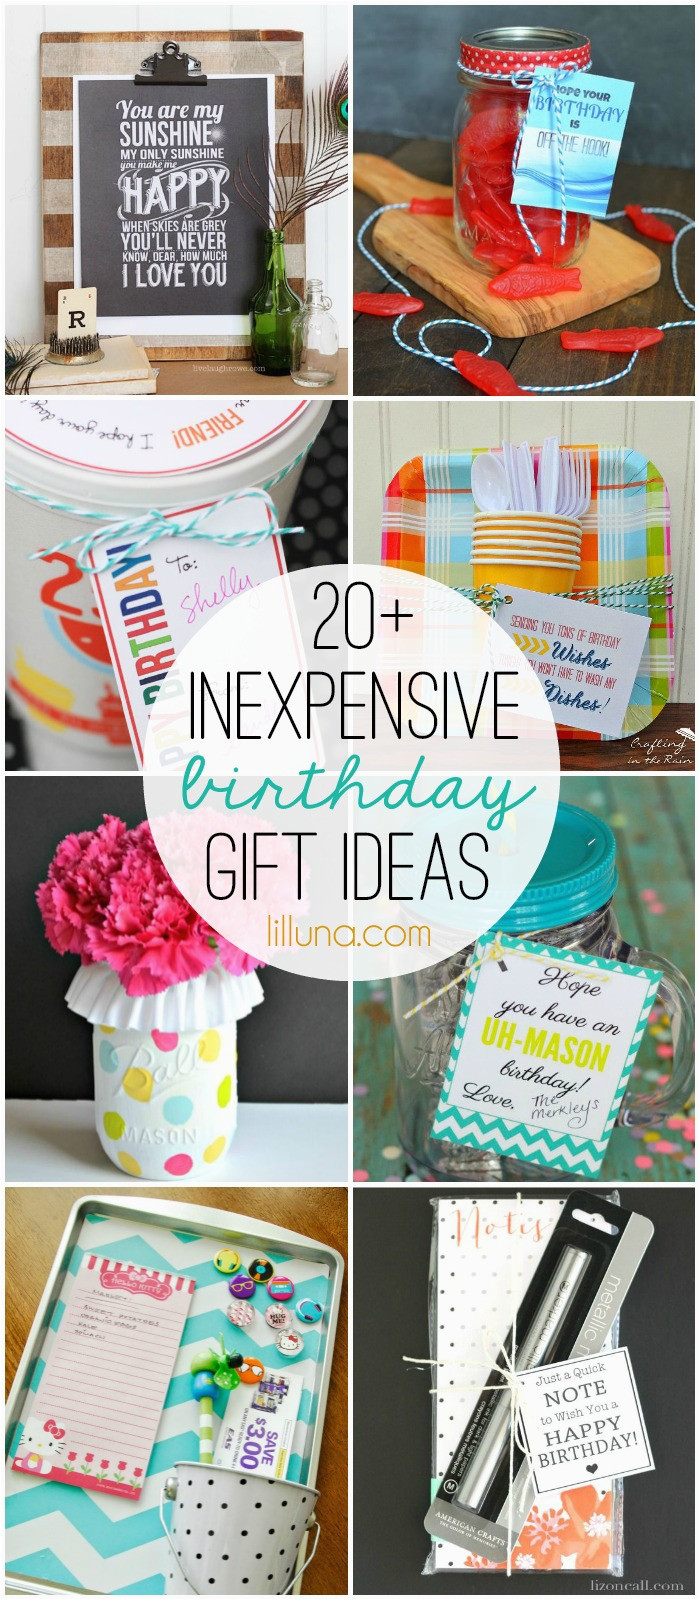 Thoughtful Birthday Gifts
 Cheap thoughtful Birthday Gifts for Her Inexpensive